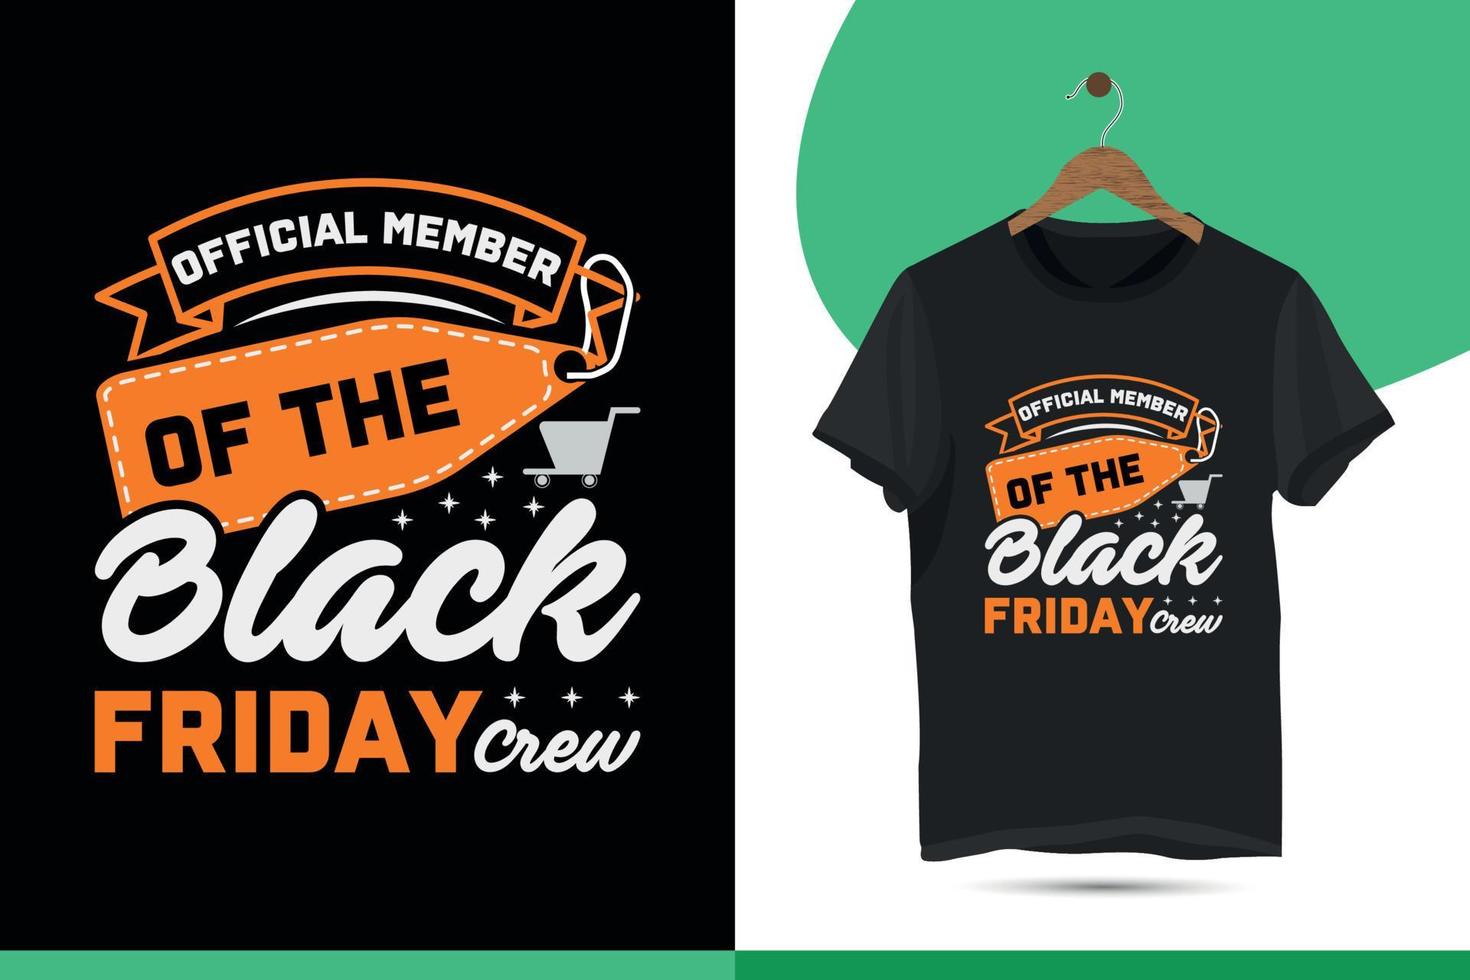 Black Friday Vector Template Design for print on t-shirts, shirts, bags, caps, mugs, and sale badges.